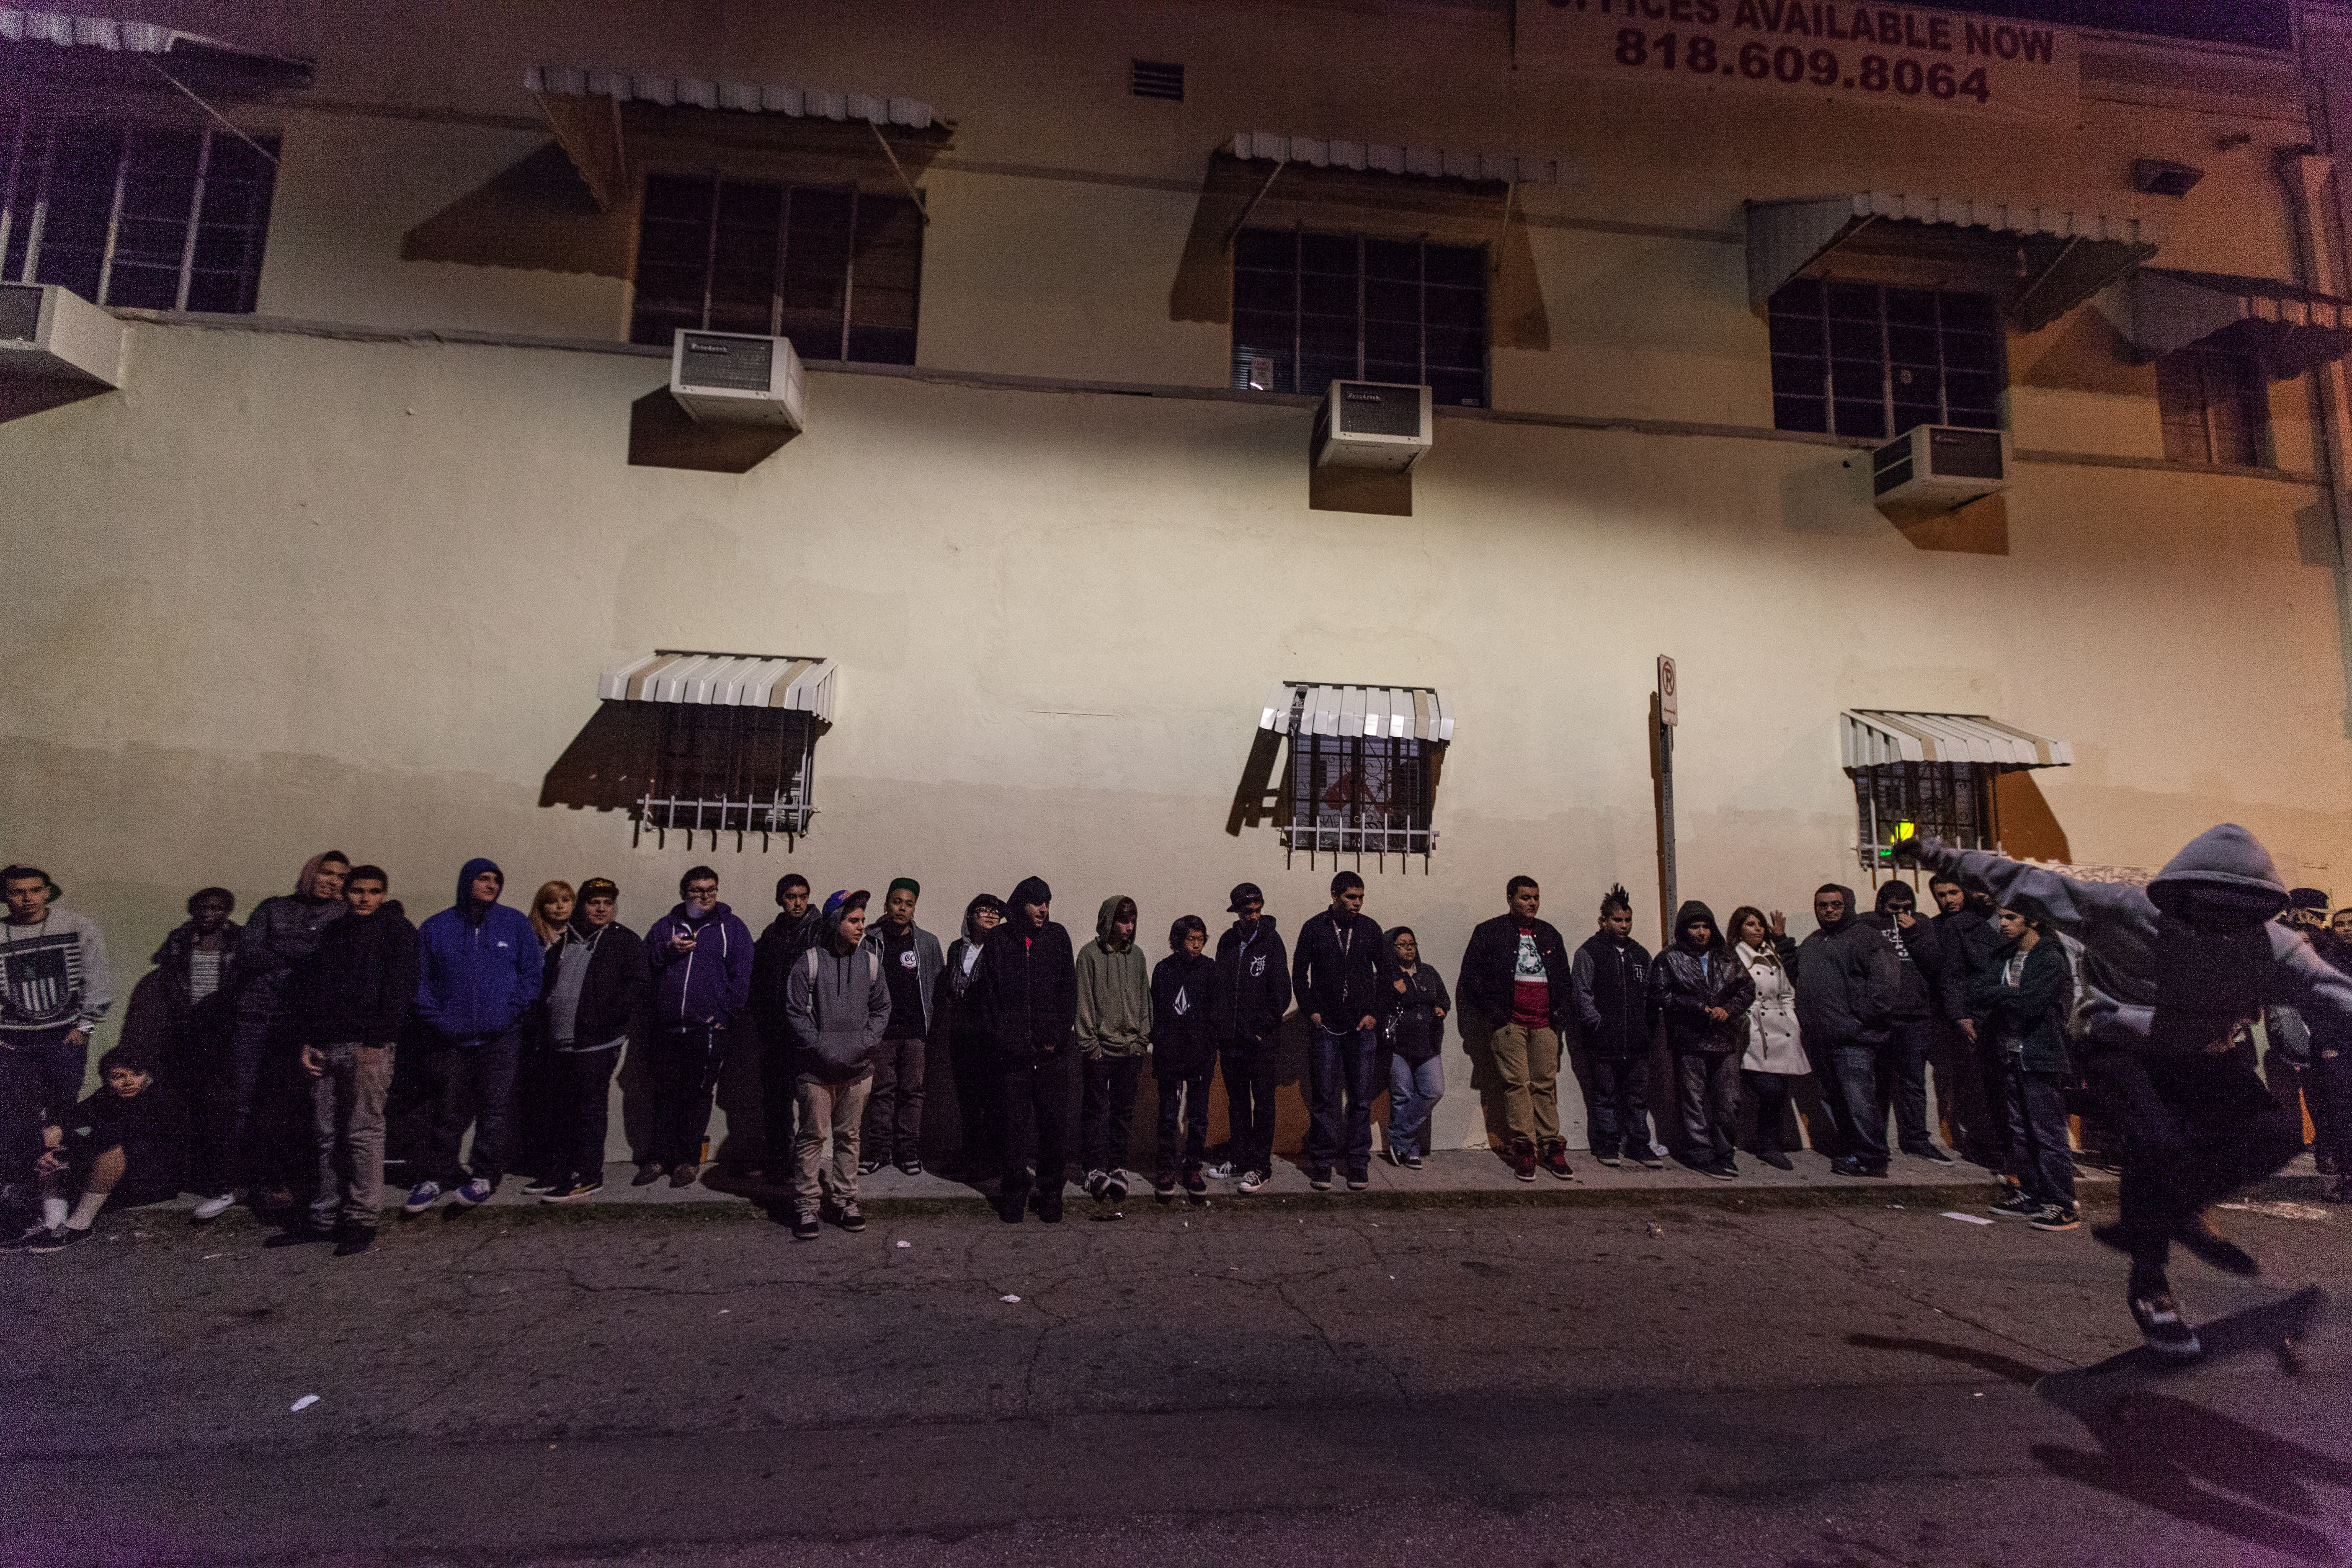 Lines outside of a store on Fairfax